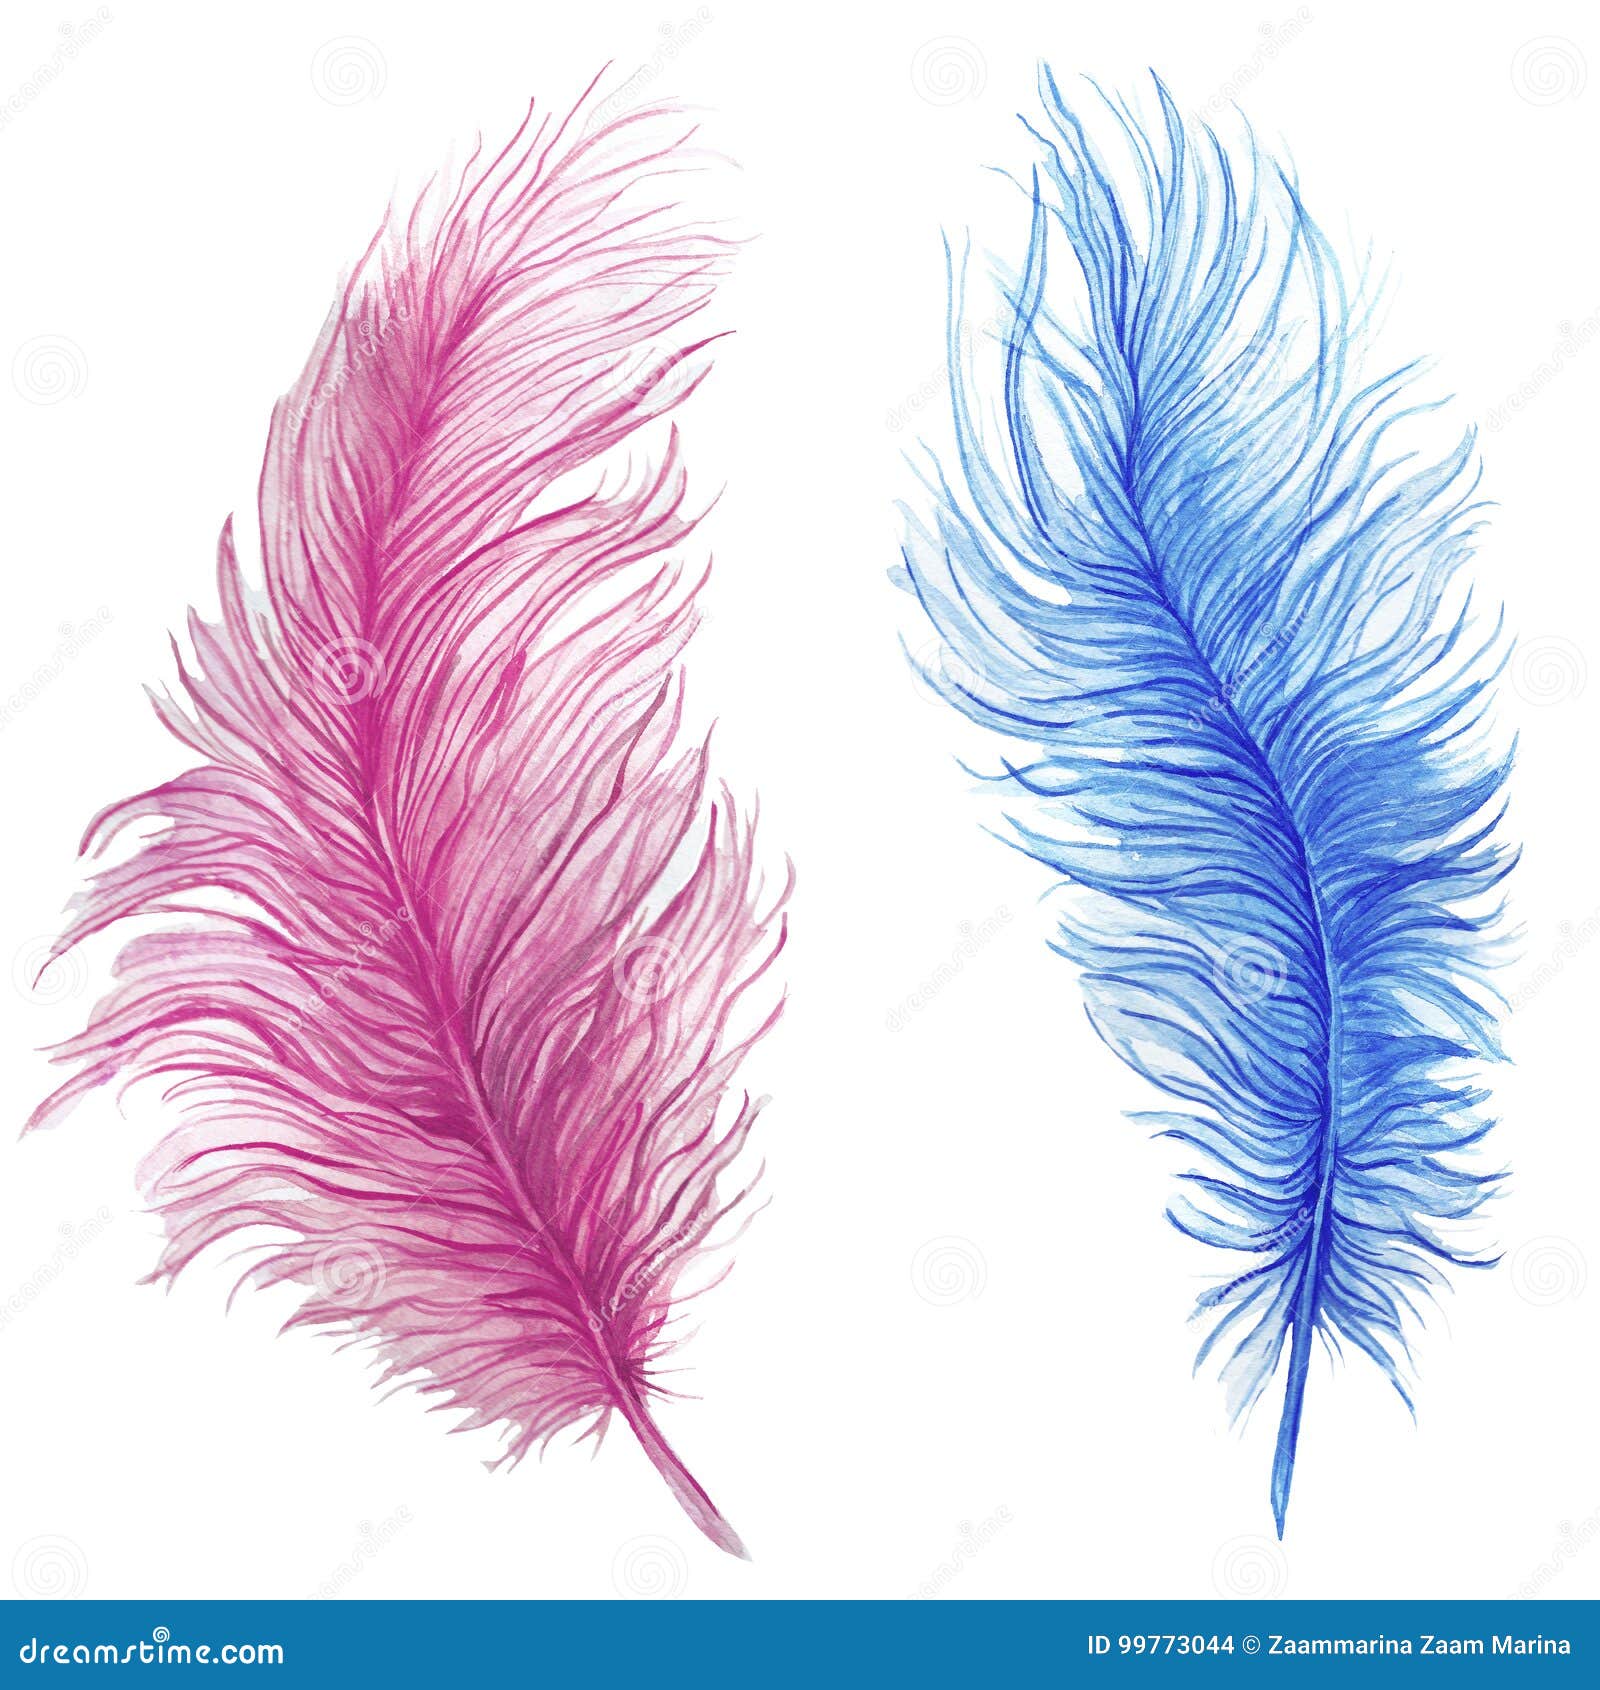 watercolor drawing, feathers, blue feather, pink feather